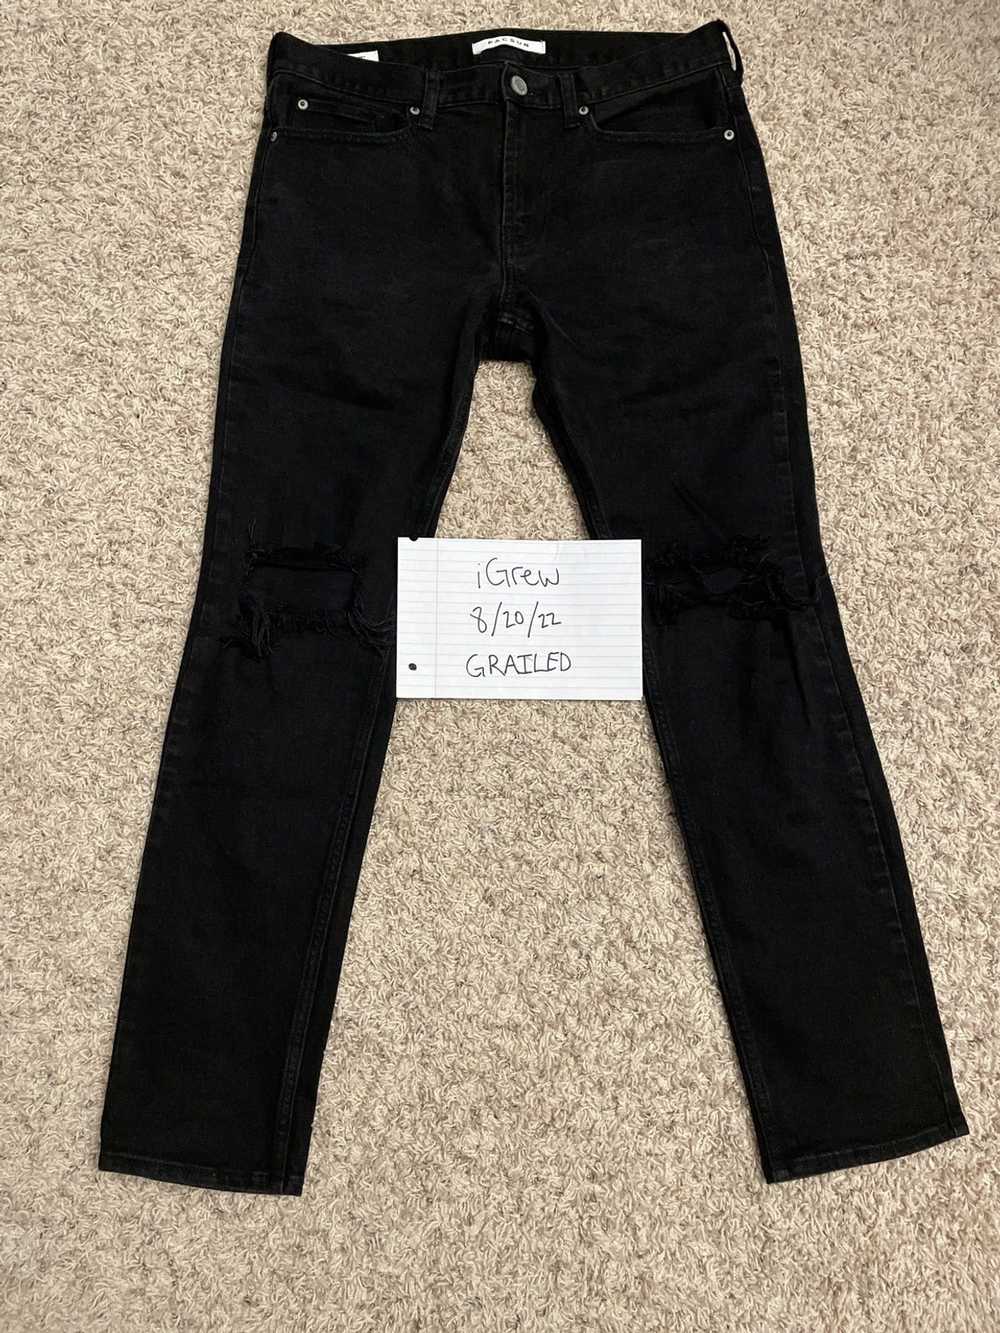 Pacsun PacSun Ripped Knees Black Skinny Jeans - image 2